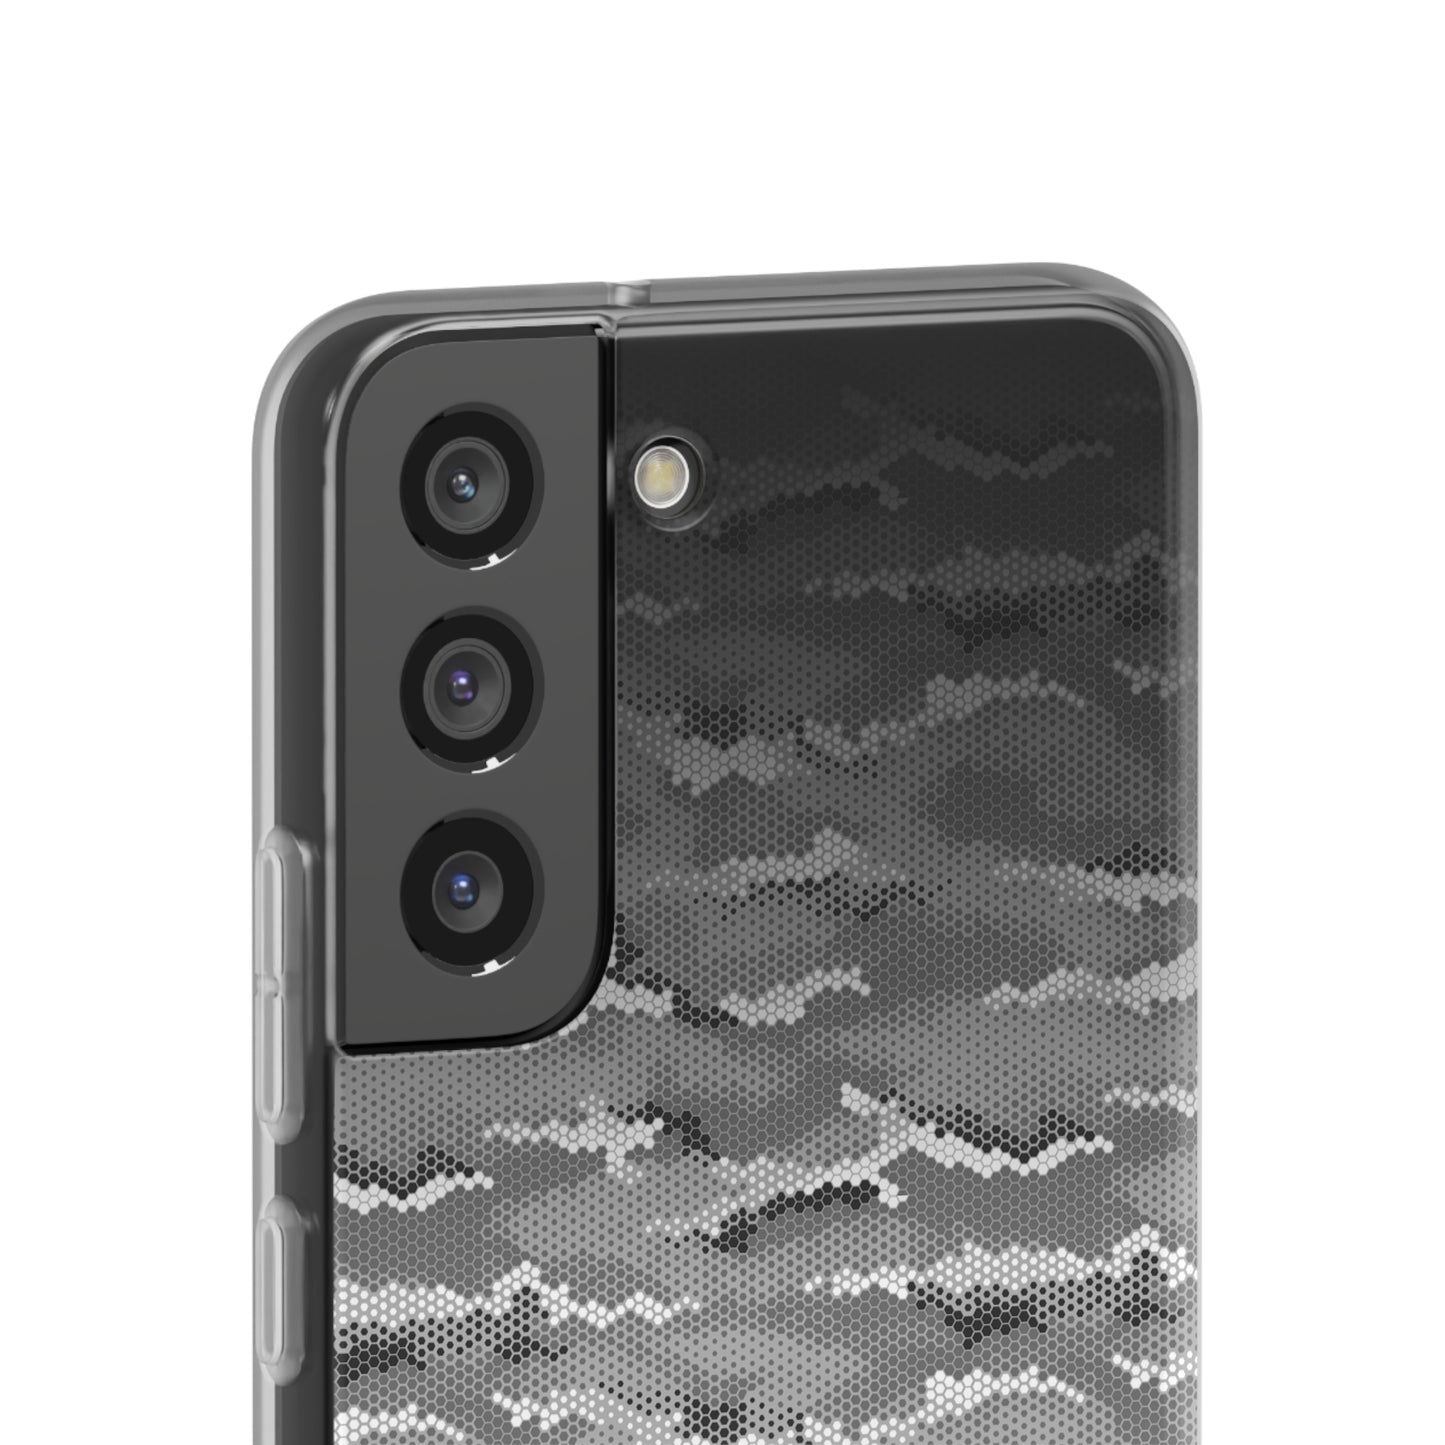 Comet Volleyball - iPhone/Samsung - Flexi Case